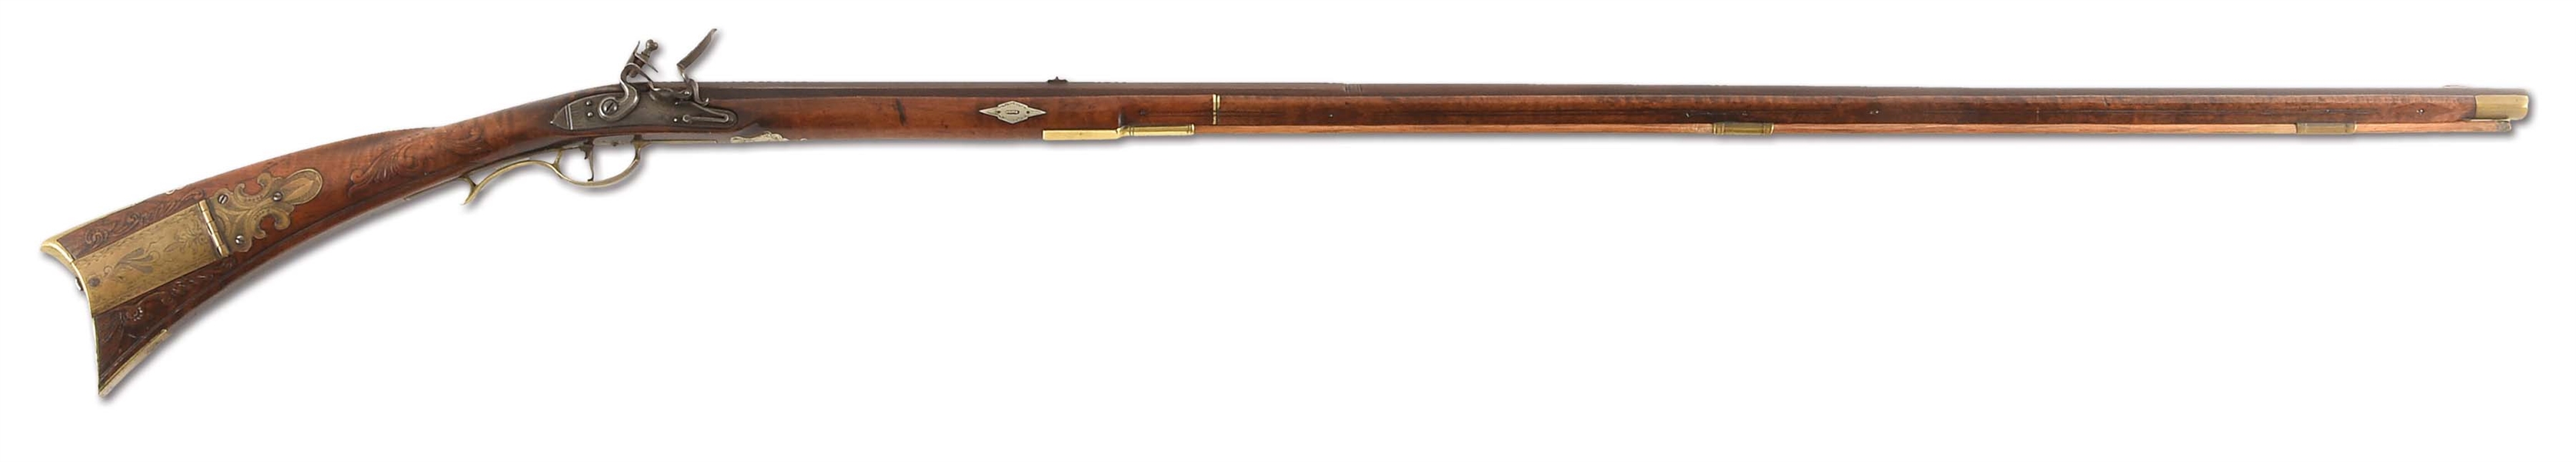 (A) EXTENSIVELY DECORATED FLINTLOCK KENTUCKY RIFLE ATTRIBUTED TO JACOB KUNTZ.